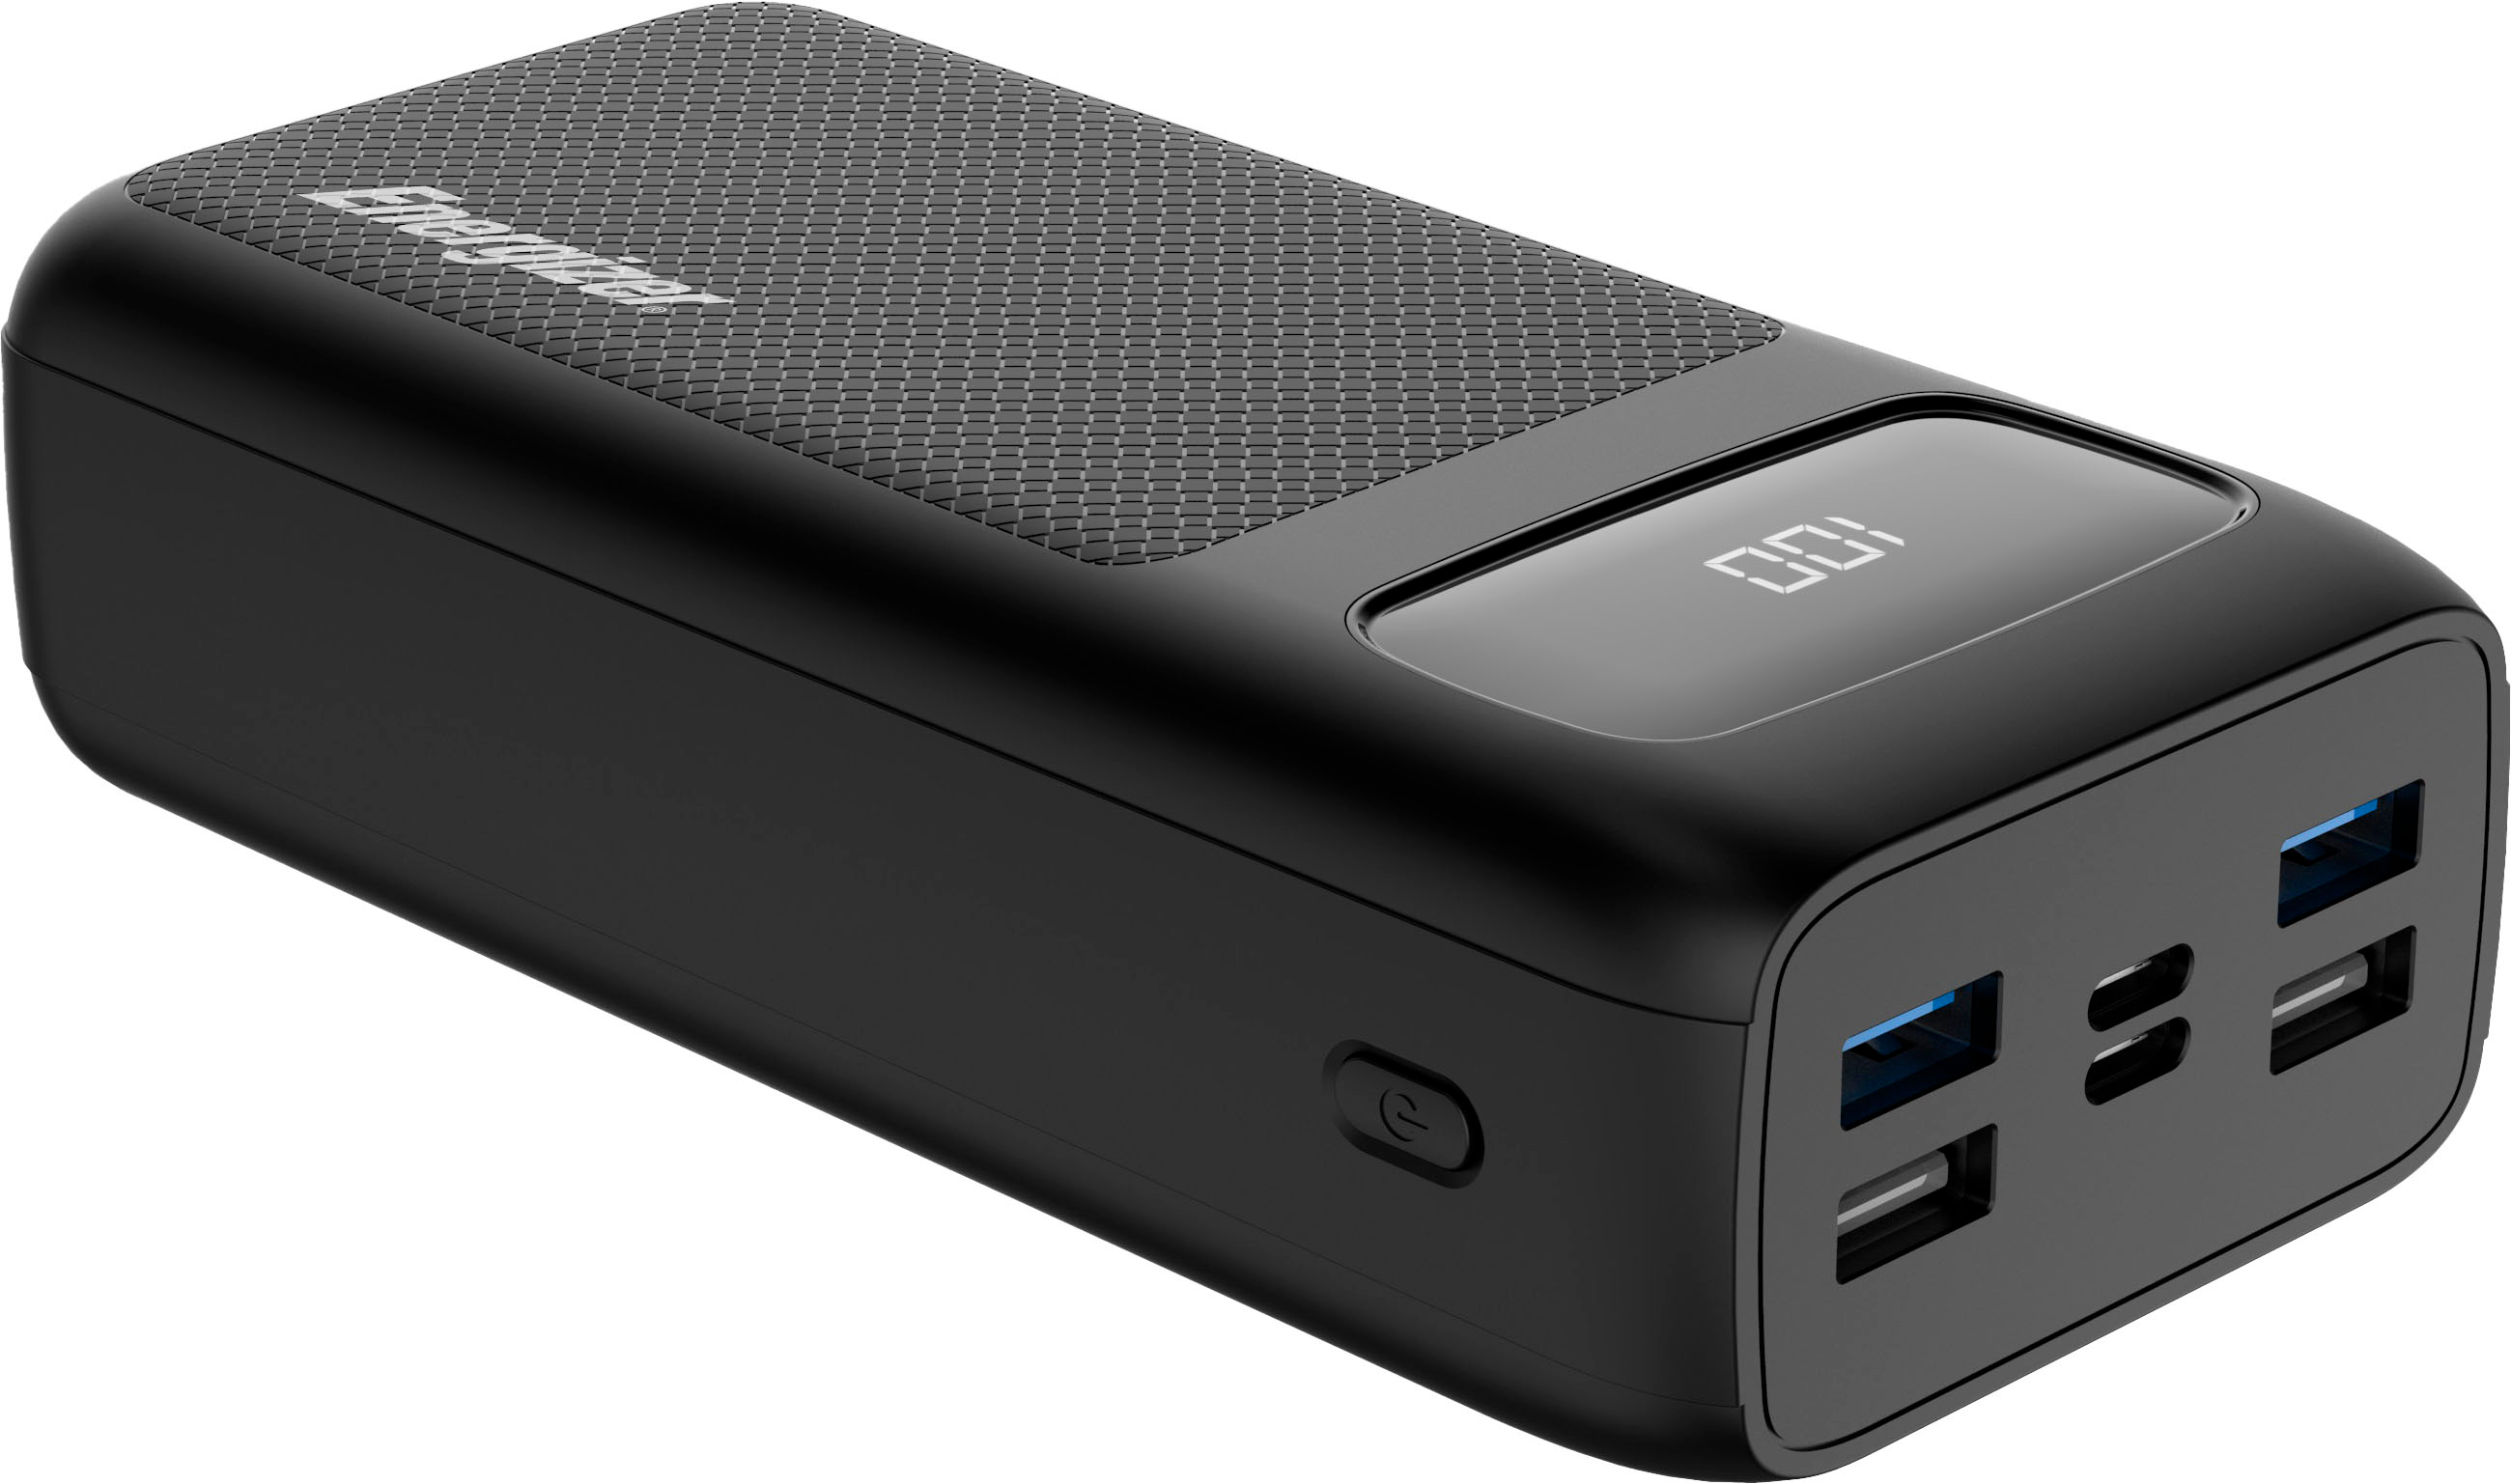 Energizer MAX 30,000mAh 15W USB-C 3-Port Universal Portable Battery Charger/Power  Bank w/ LCD screen for Smartphones & Accessories Black UE30068 - Best Buy